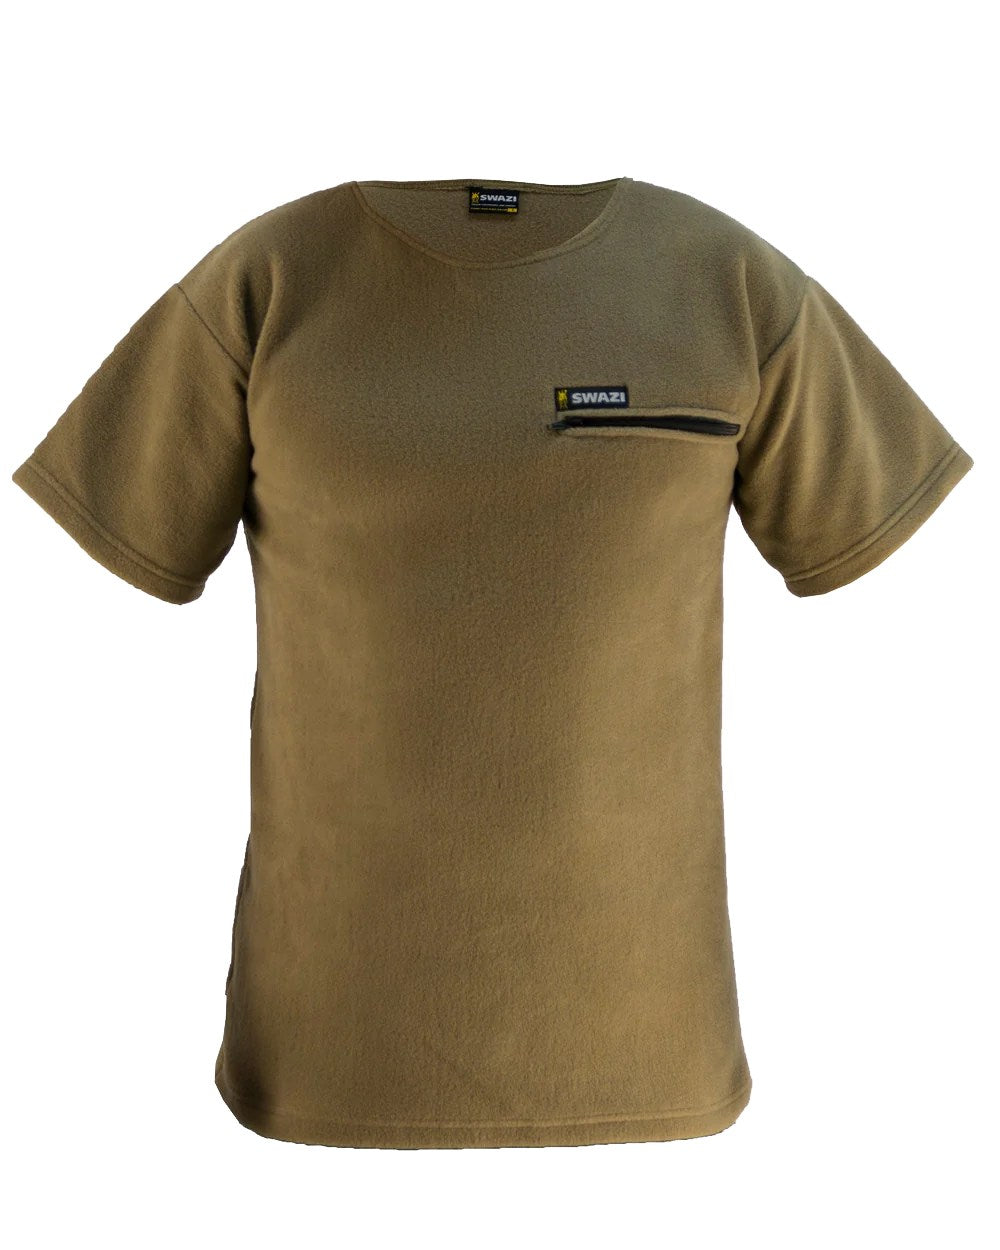 Tussock Coloured Swazi Bushmans Tee On A White Background 